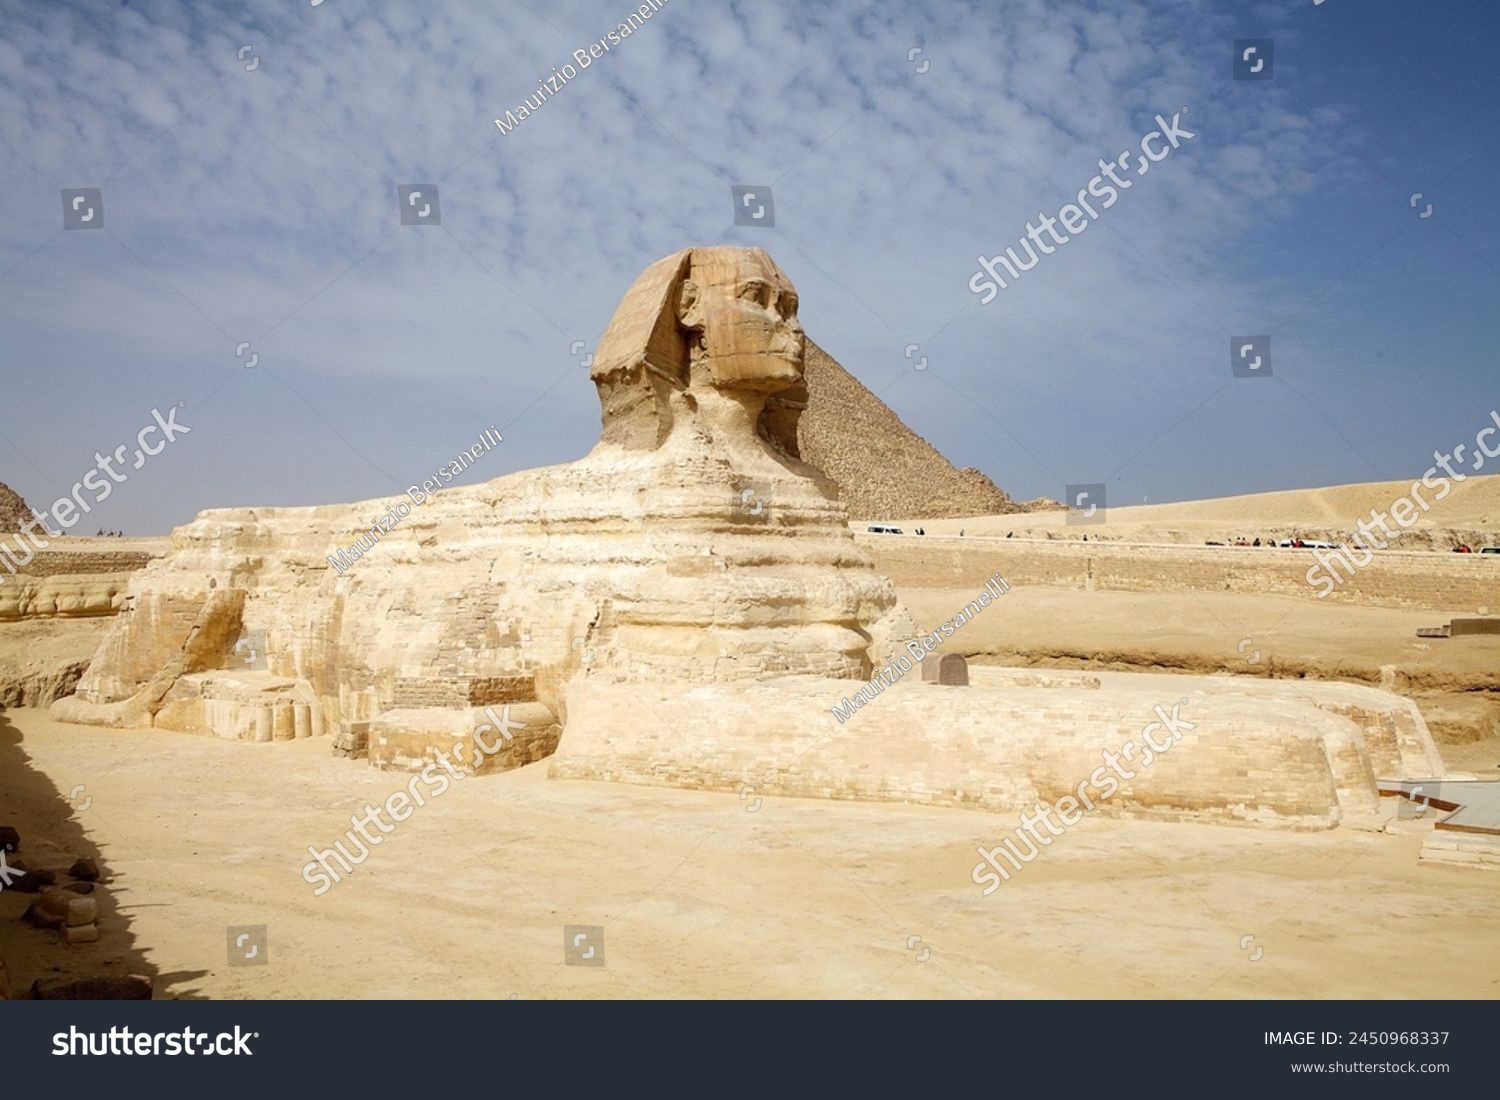 The Great Sphinx and the Great Pyramids in Giza, Egypt. They were built during the Fourth Dynasty of the Old Kingdom #2450968337